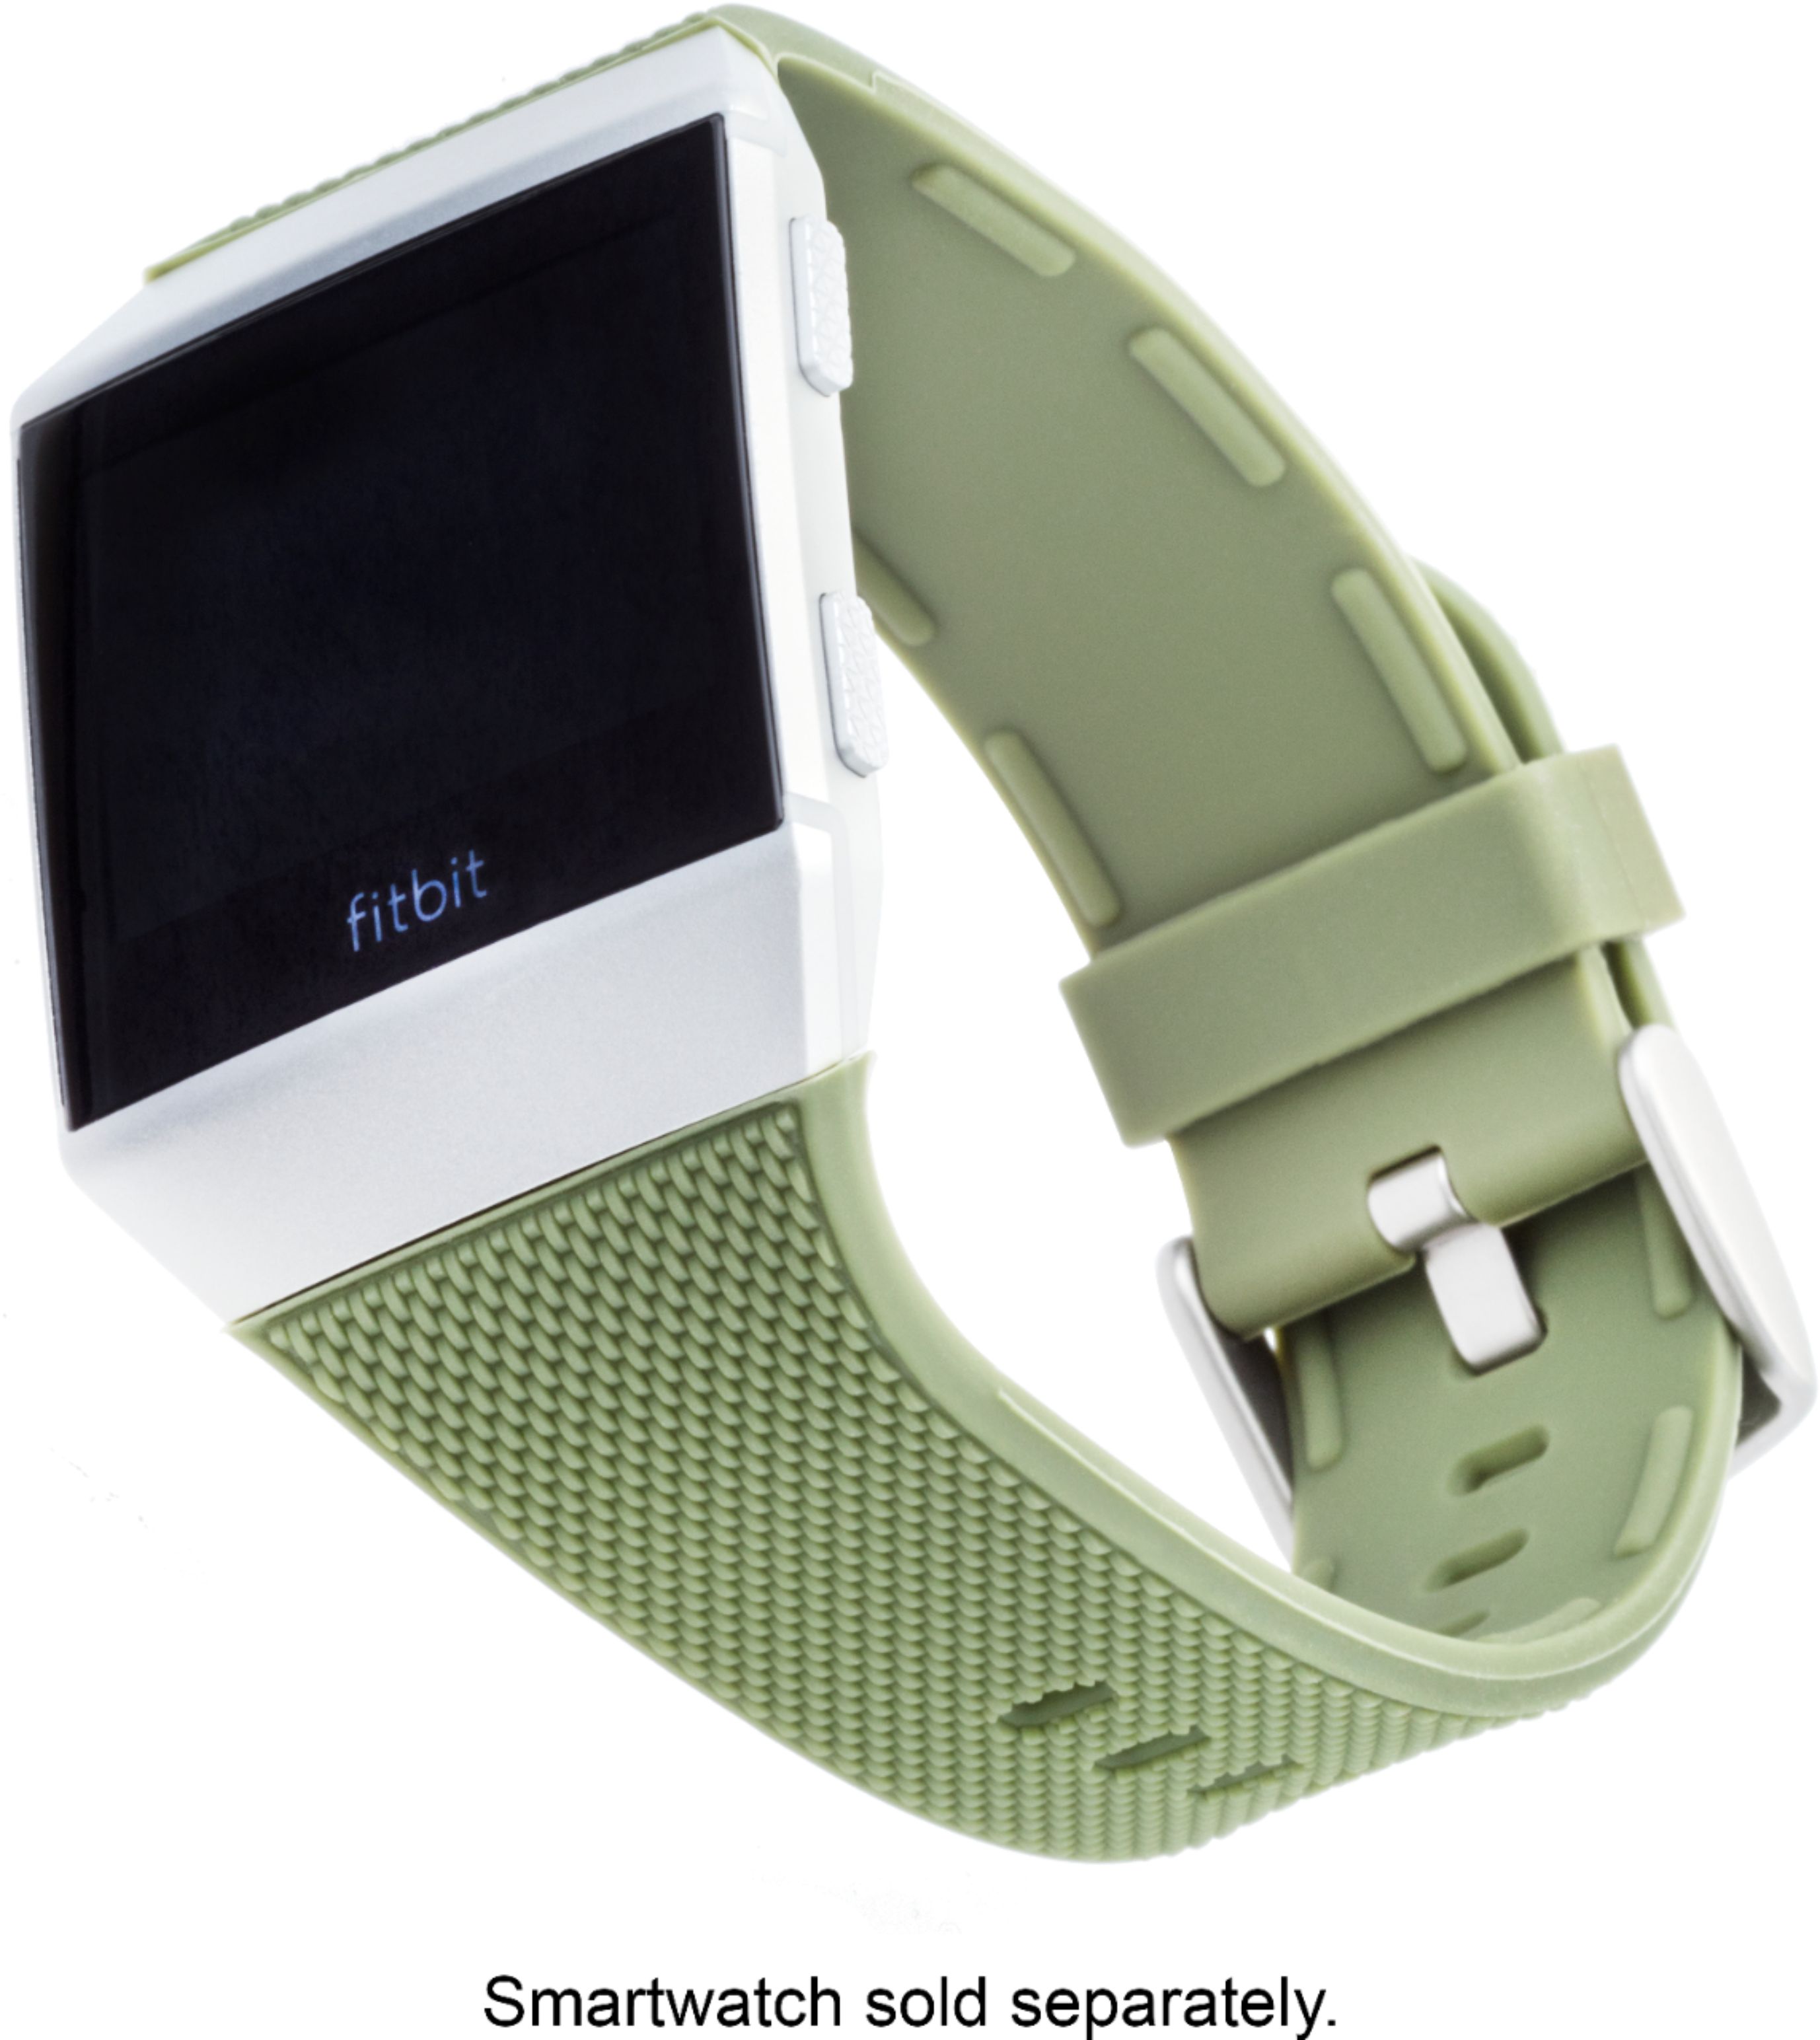 Customer Reviews: WITHit Band Kit for Fitbit™ Ionic (2-Pack) Green ...